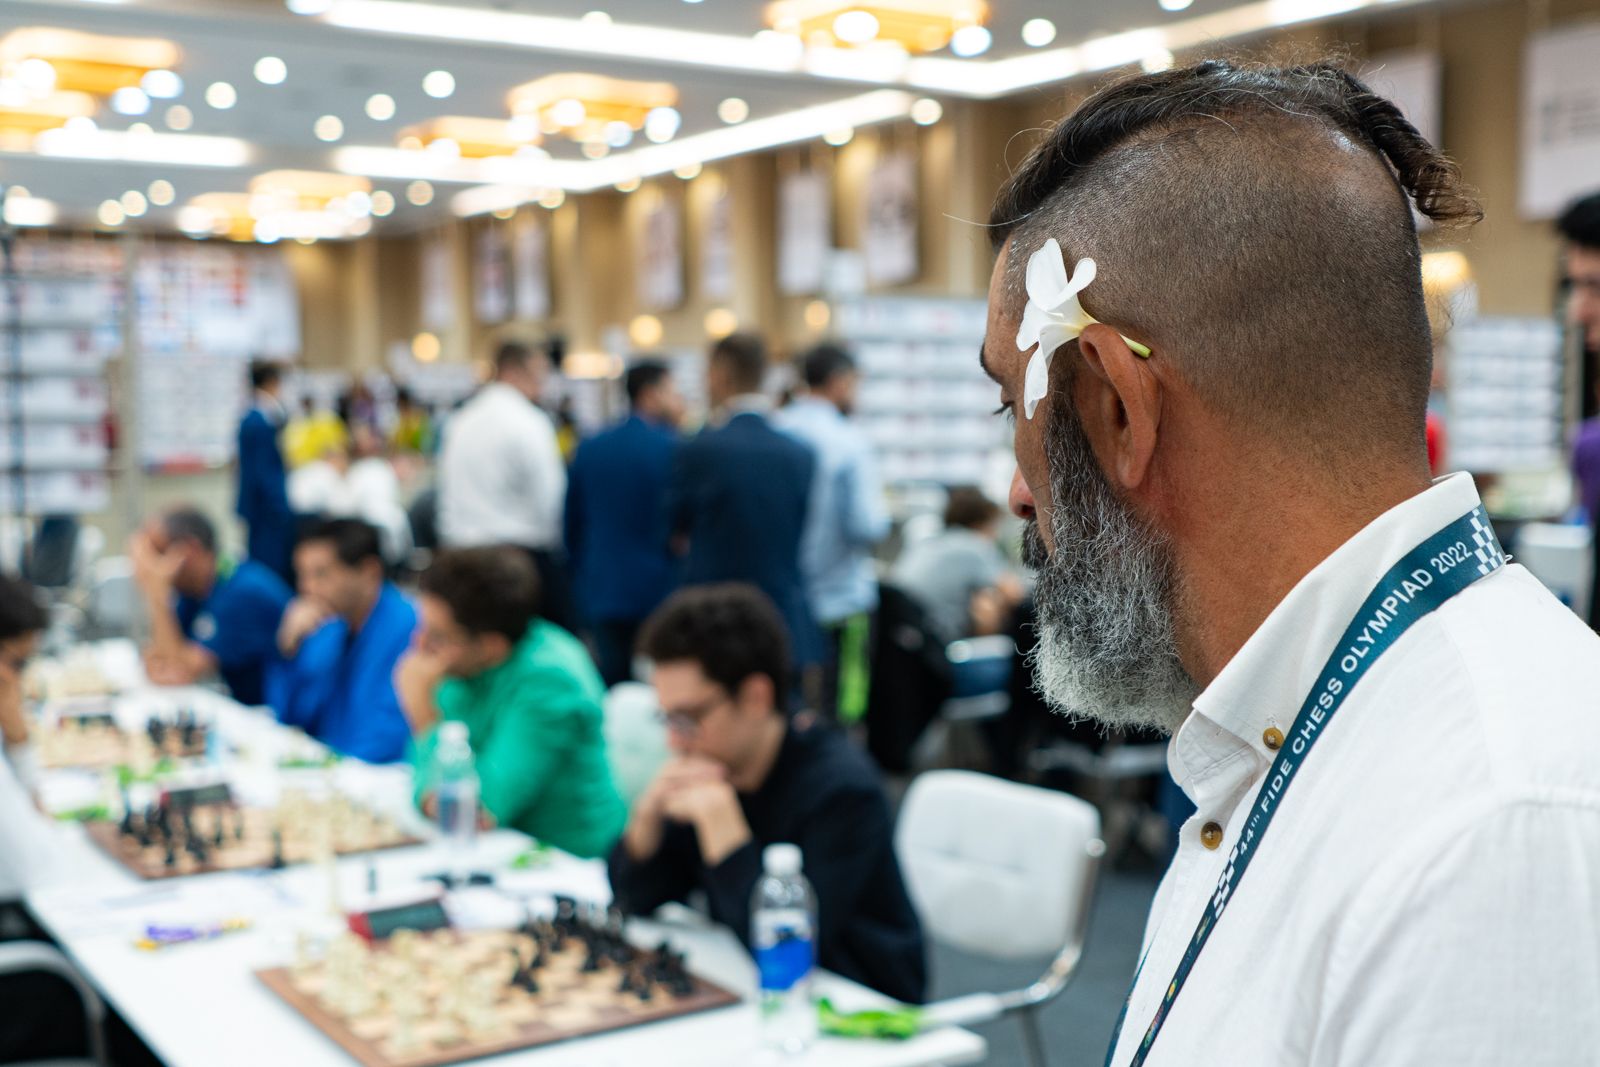 Results – Chess Olympiad 2022 round 5 (open section) – Chessdom